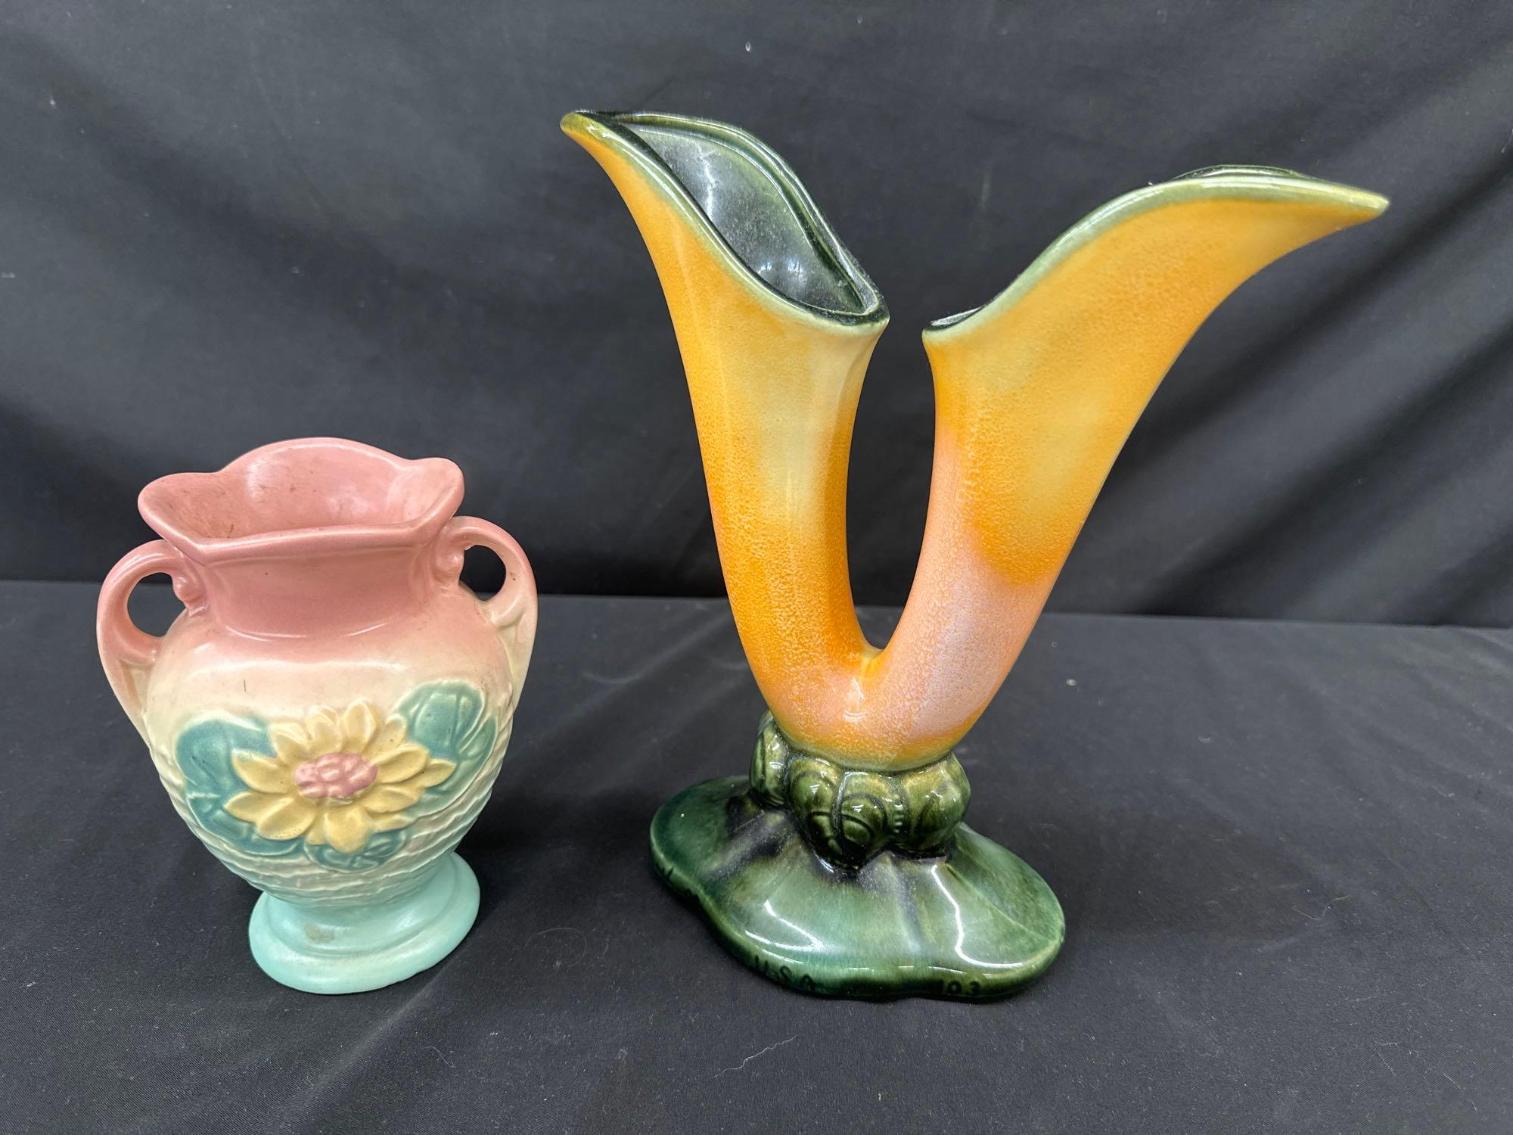 December Consignment Auction